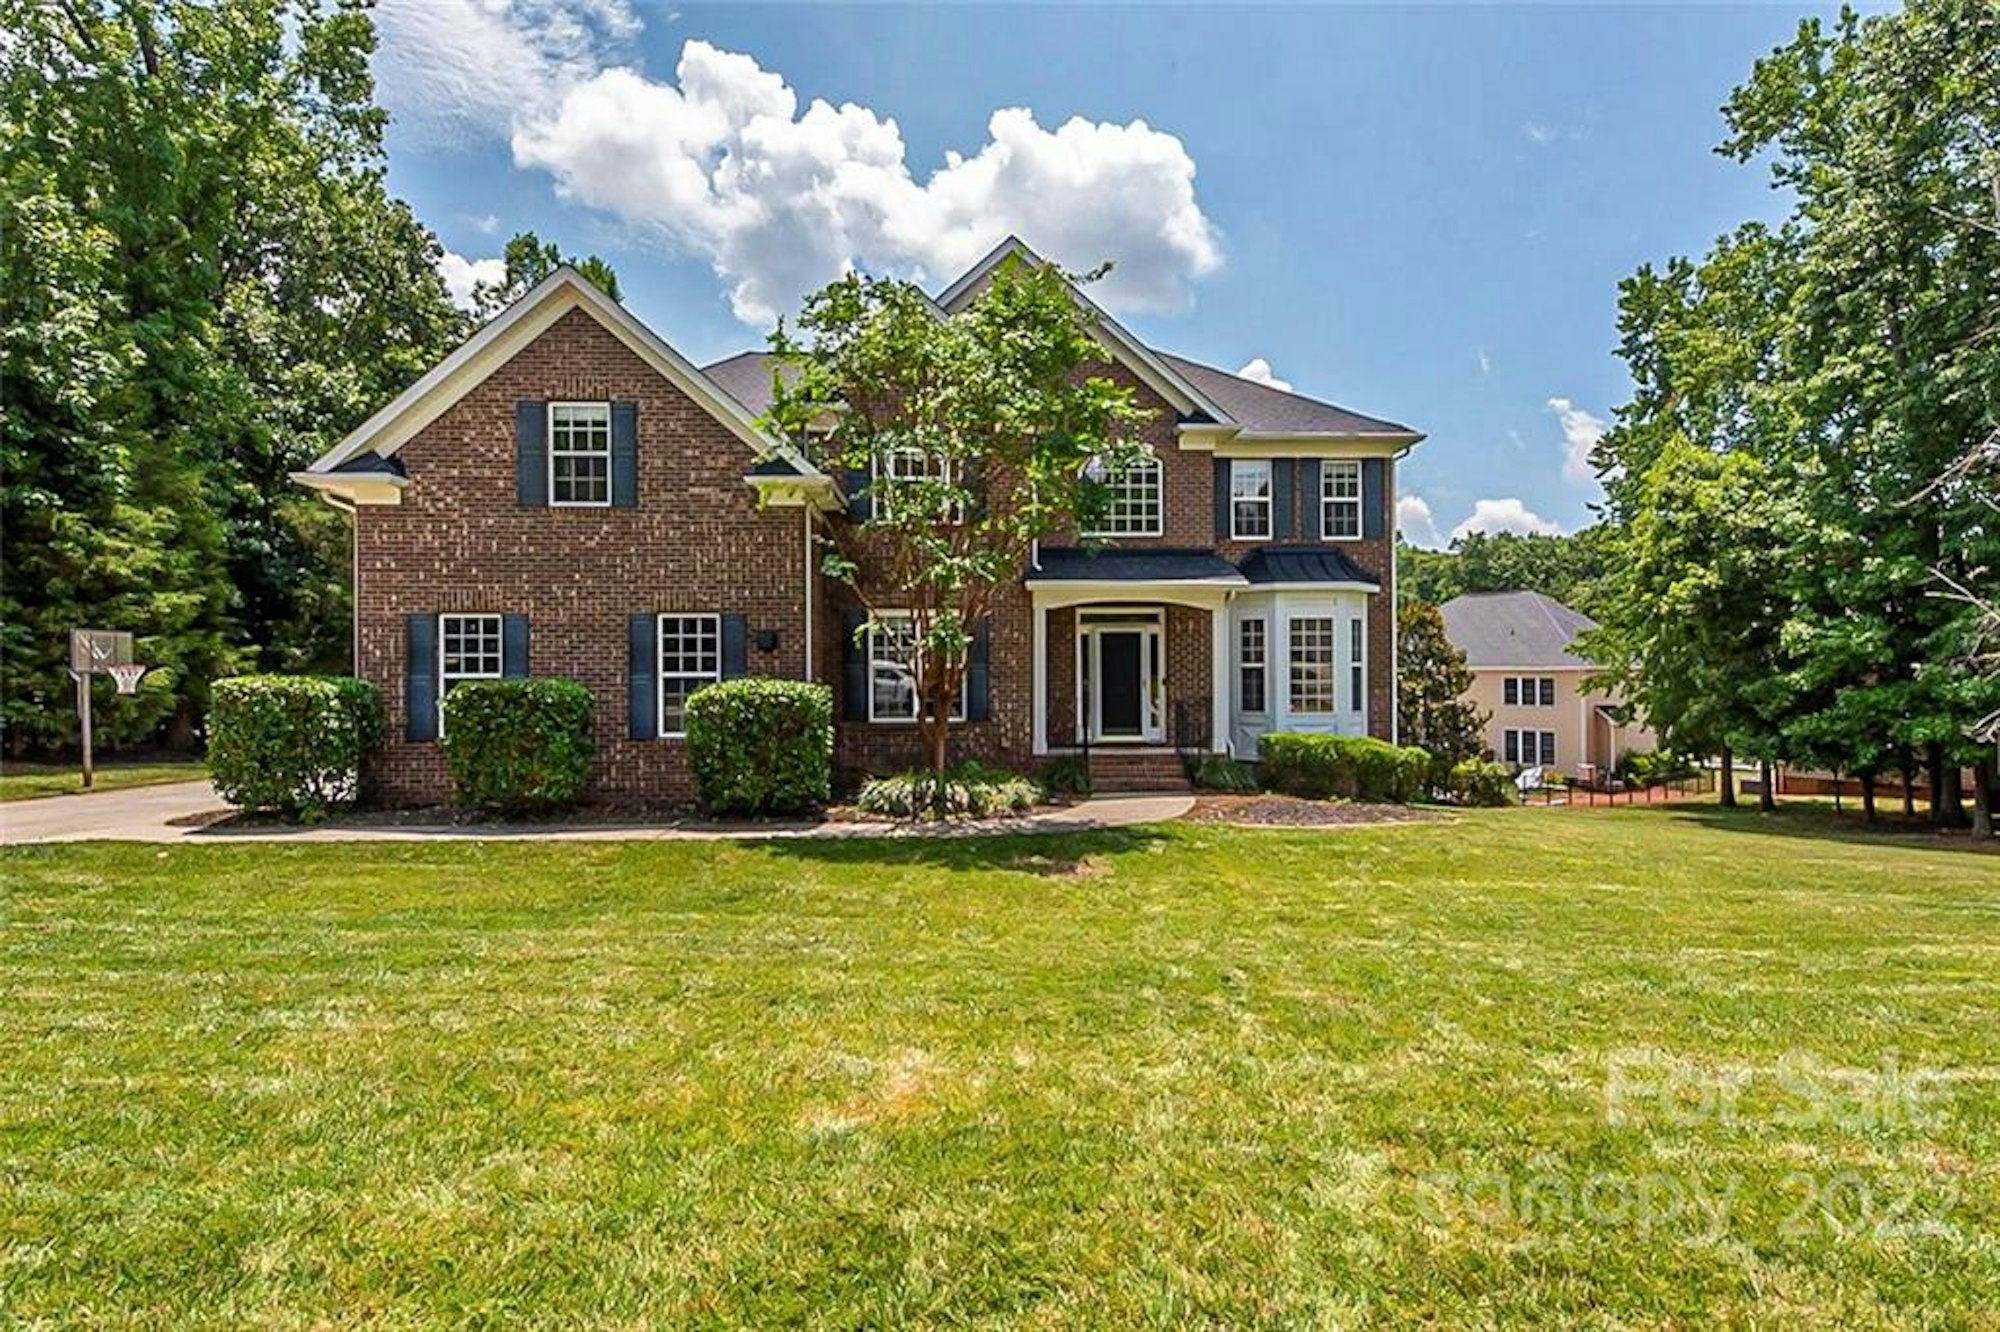 Photo 1 of 22 - 114 Forest Walk Way, Mooresville, NC 28115